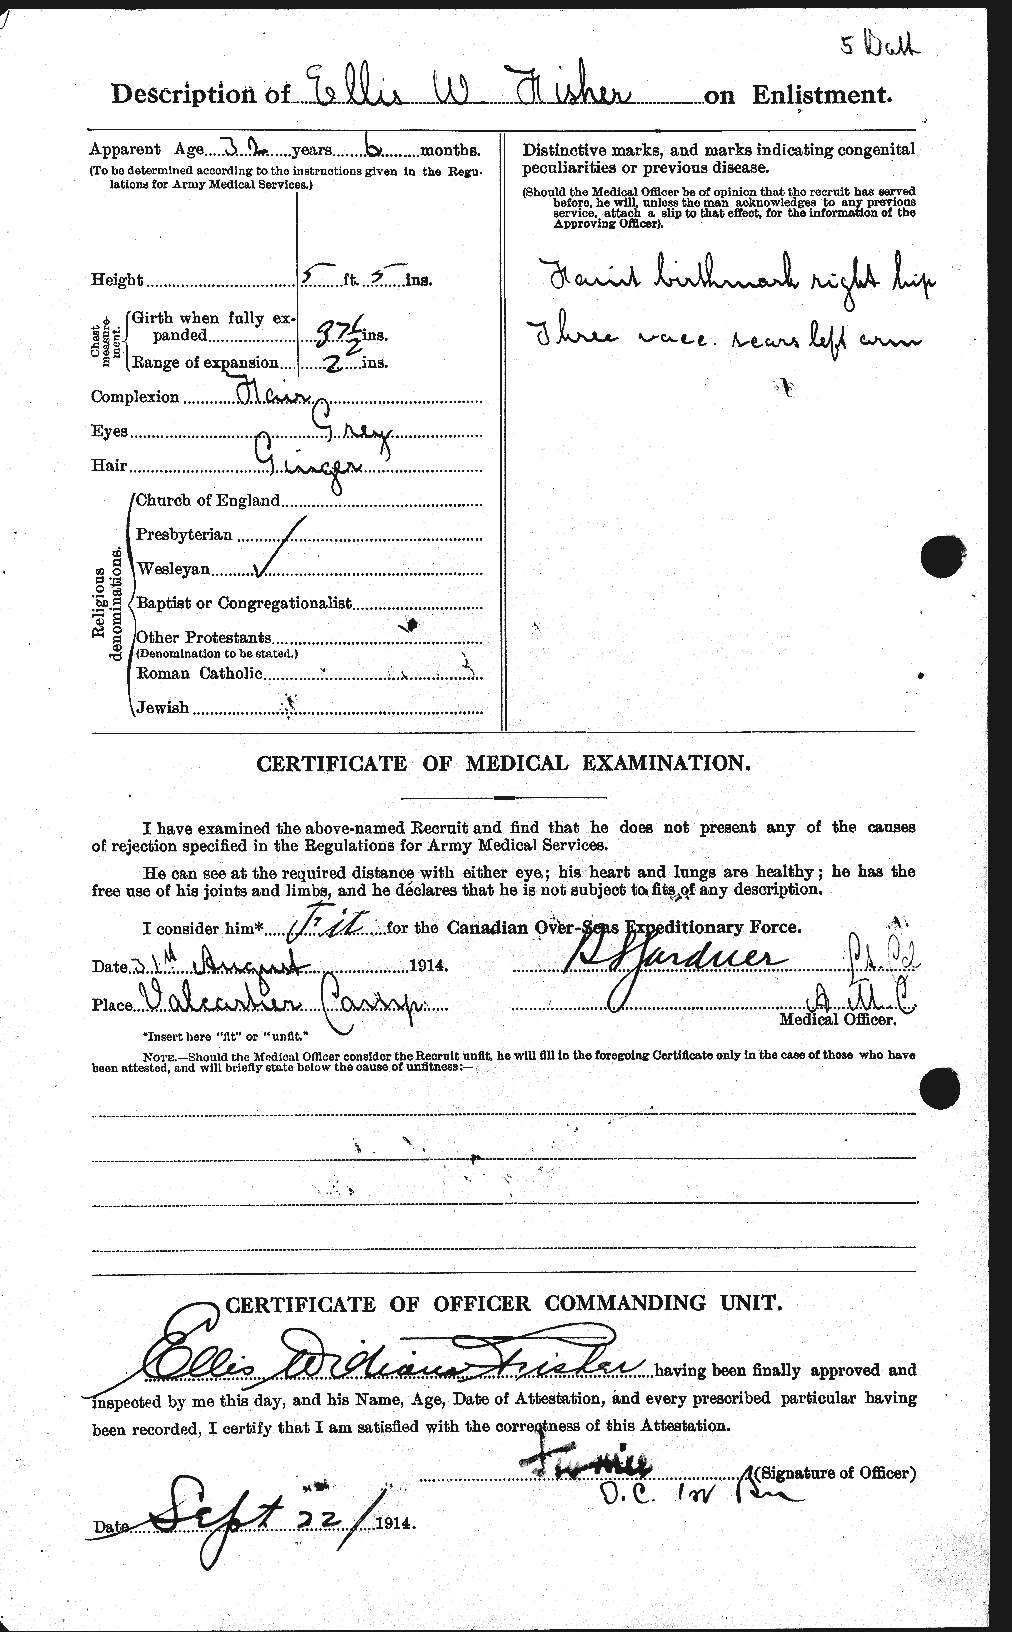 Personnel Records of the First World War - CEF 325384b